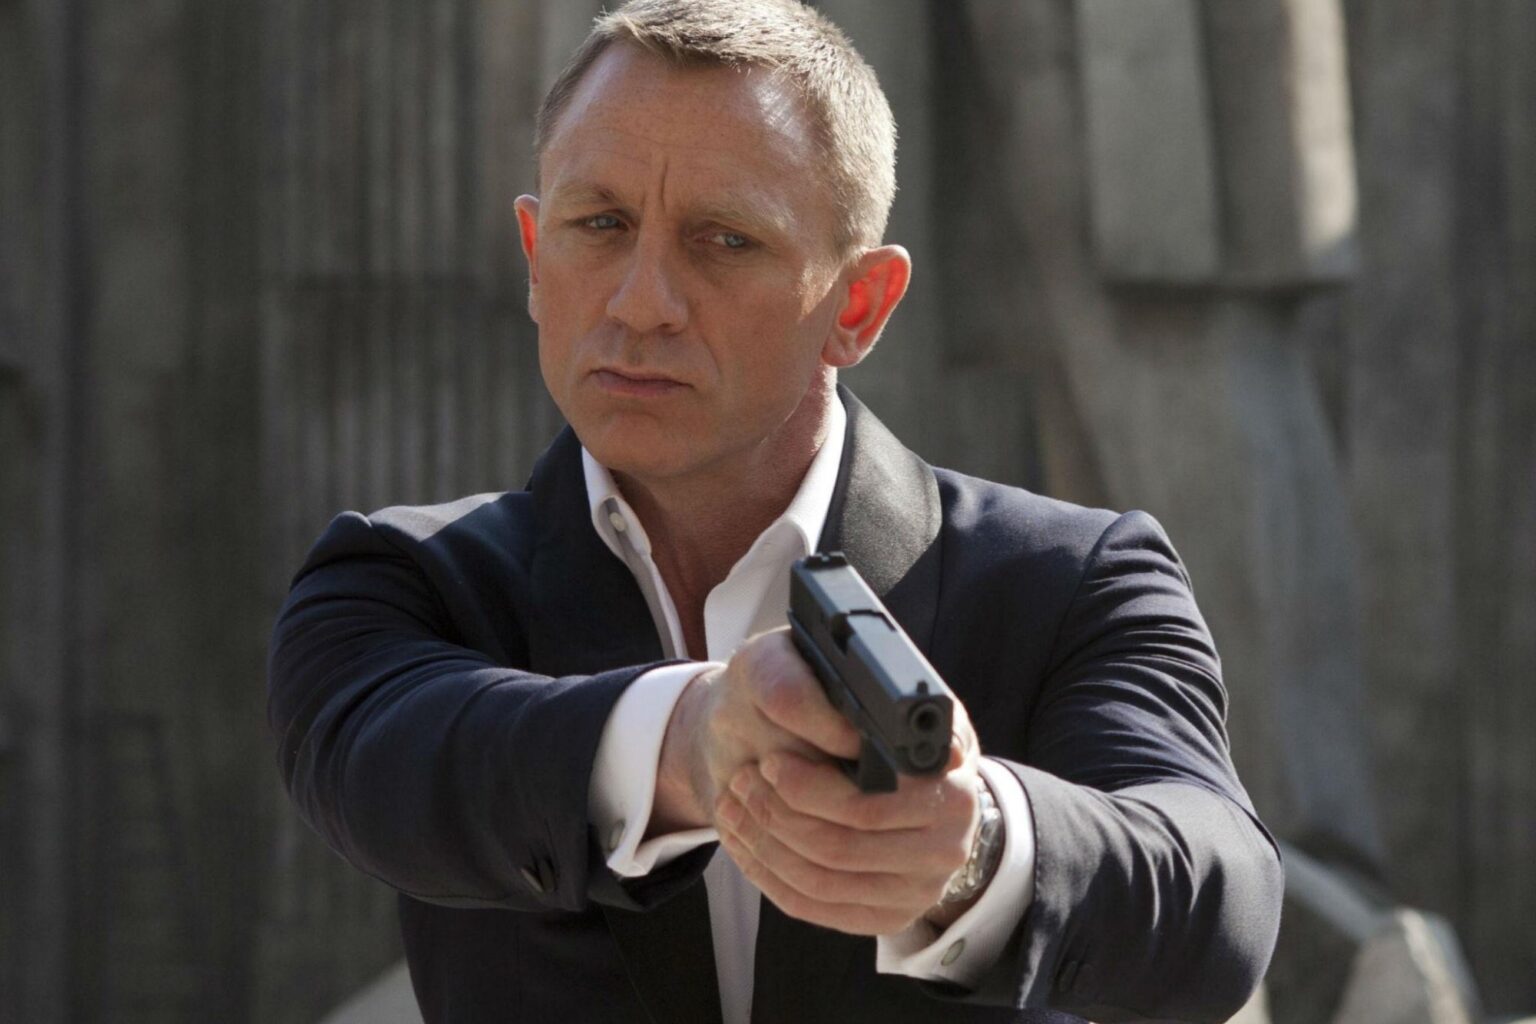 Bond, James Bond. Here are some of our picks for the best 007 films of all time.